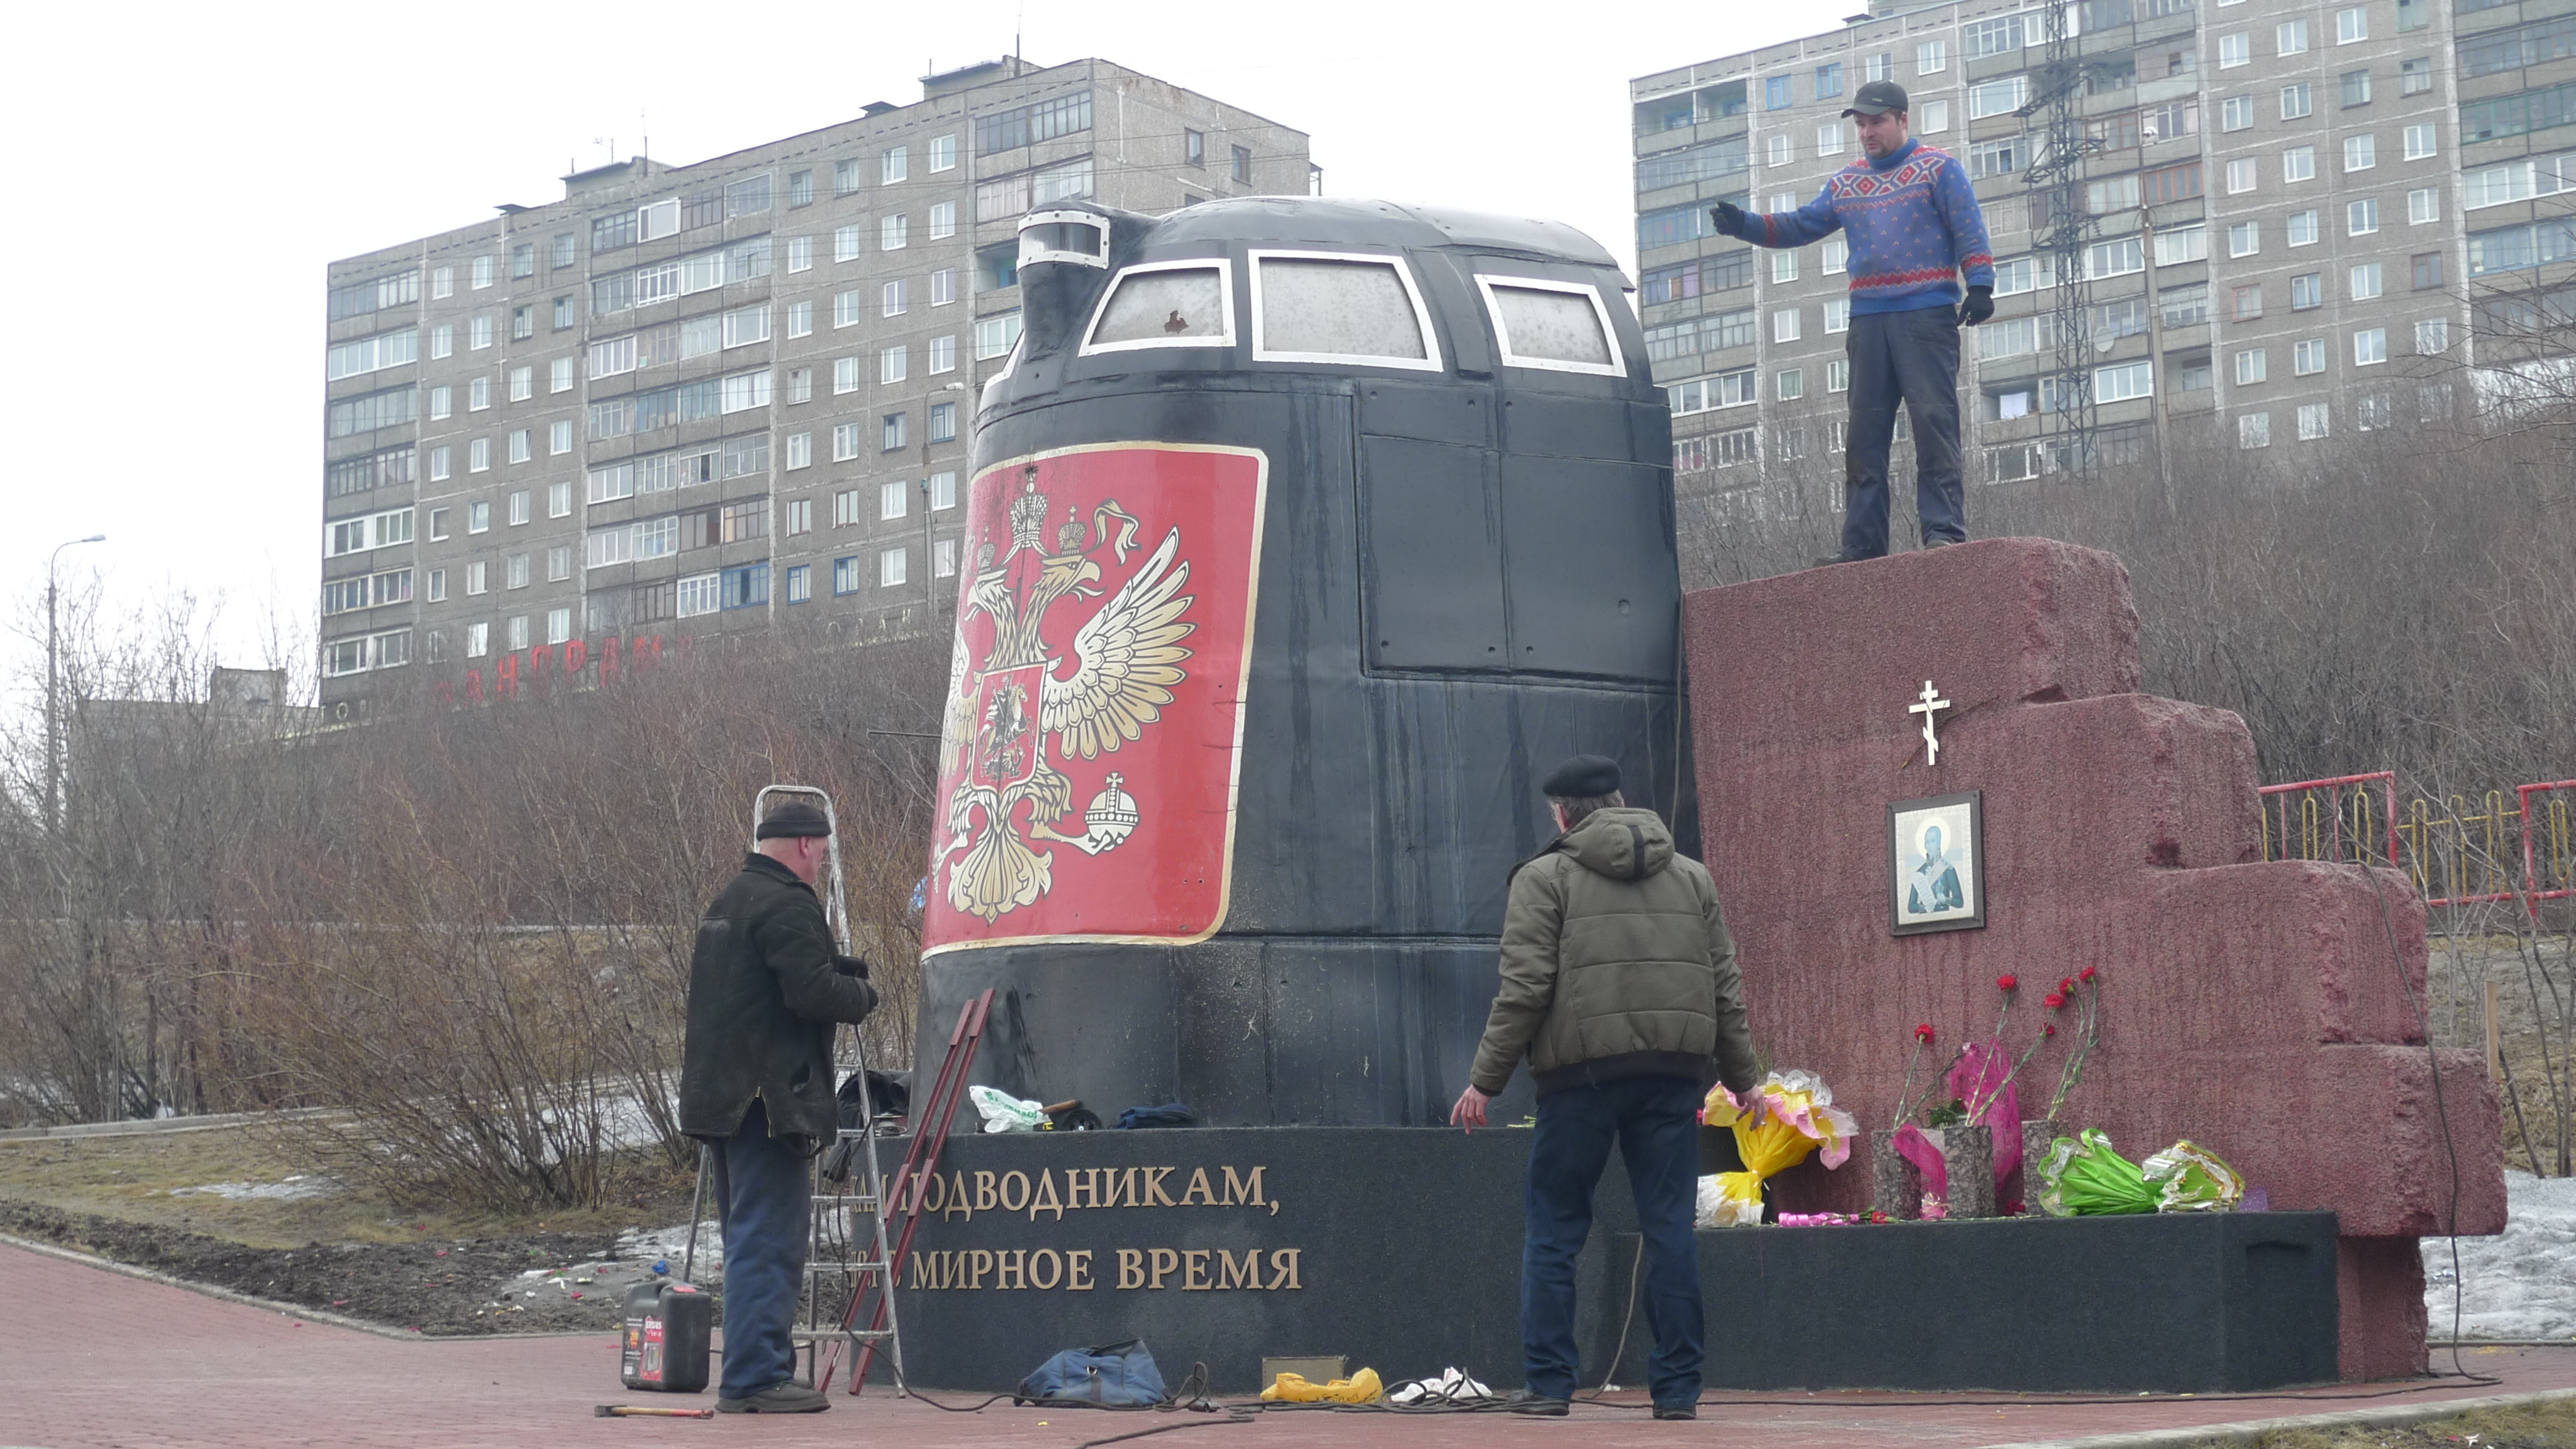 On This Day The Kursk Submarine Disaster The Independent